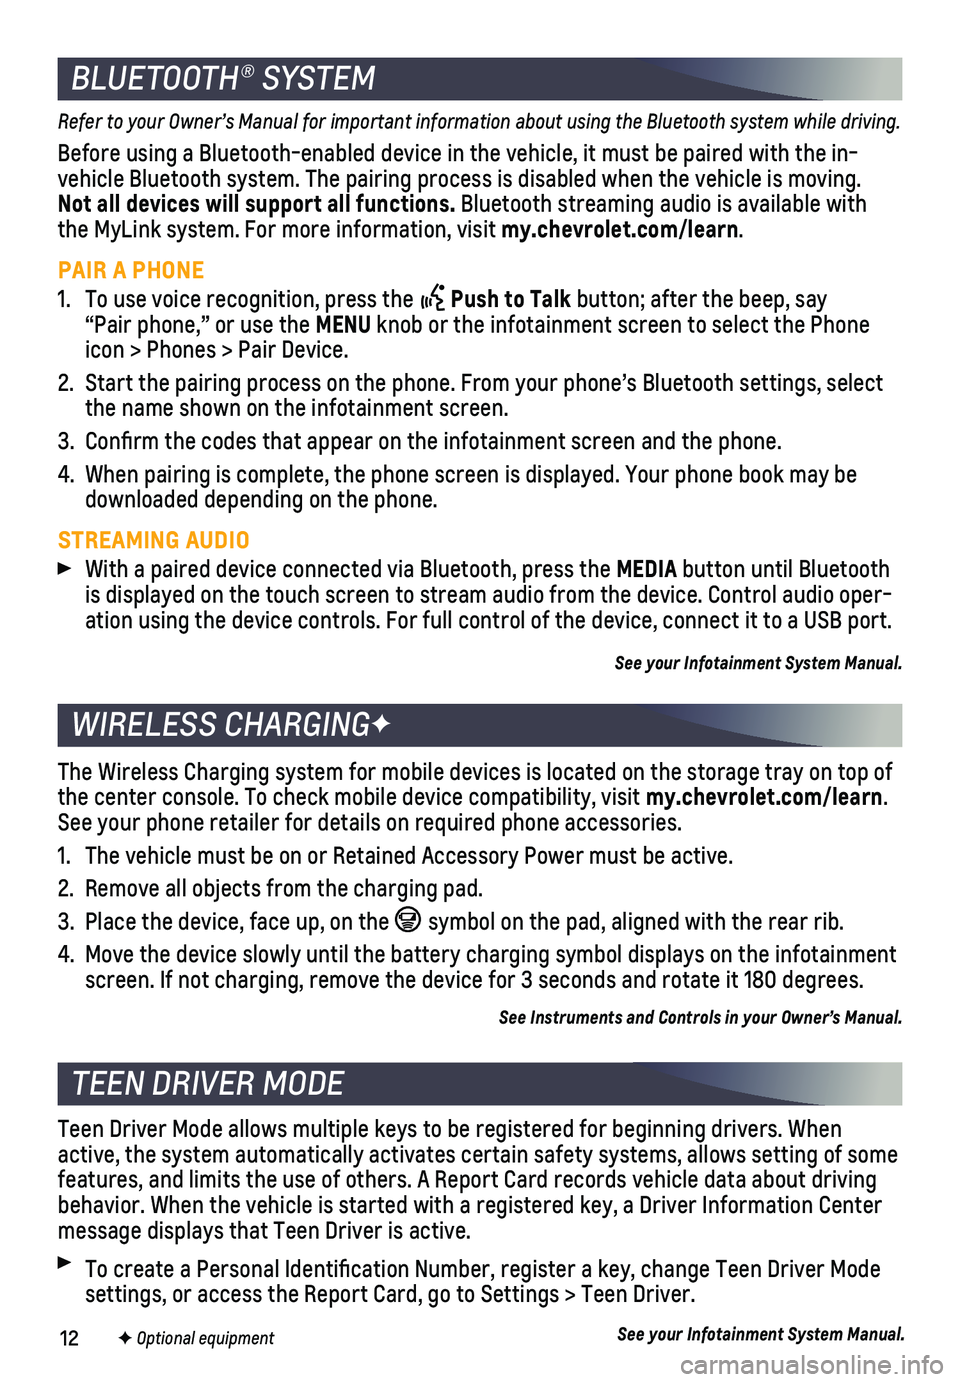 CHEVROLET TAHOE 2018  Get To Know Guide 12
Refer to your Owner’s Manual for important information about using the Bluetooth system while driving. 
Before using a Bluetooth-enabled device in the vehicle, it must be paire\
d with the in- v